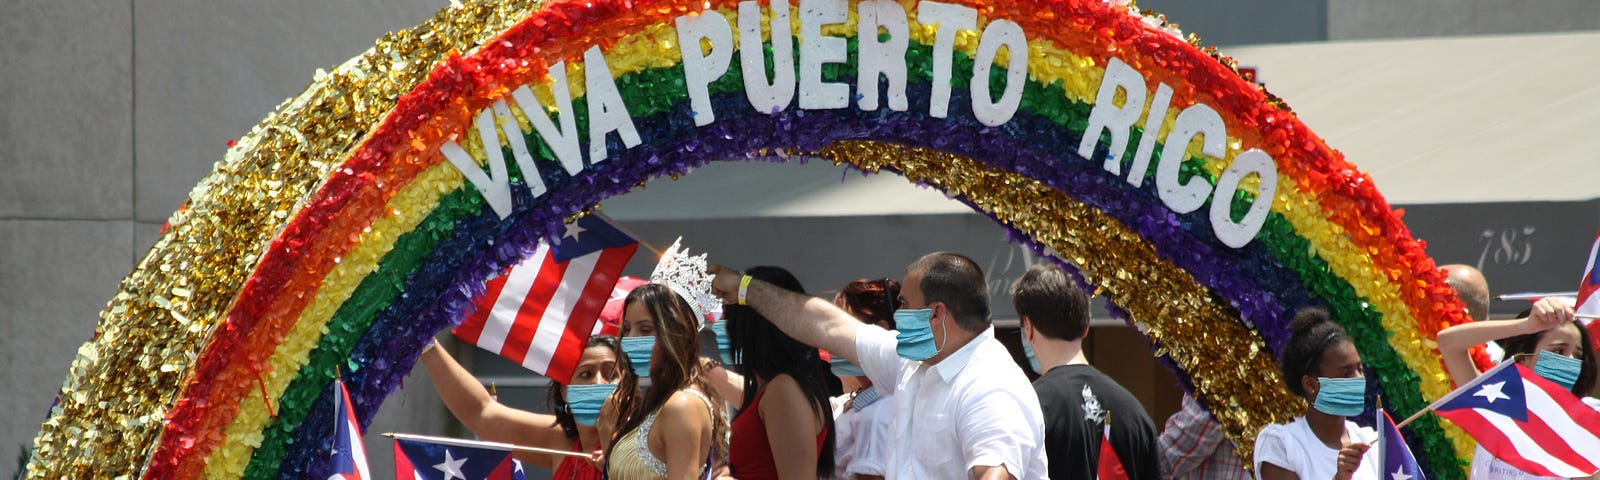 Puerto Rican Festival with celebrants in surgeon’s masks.